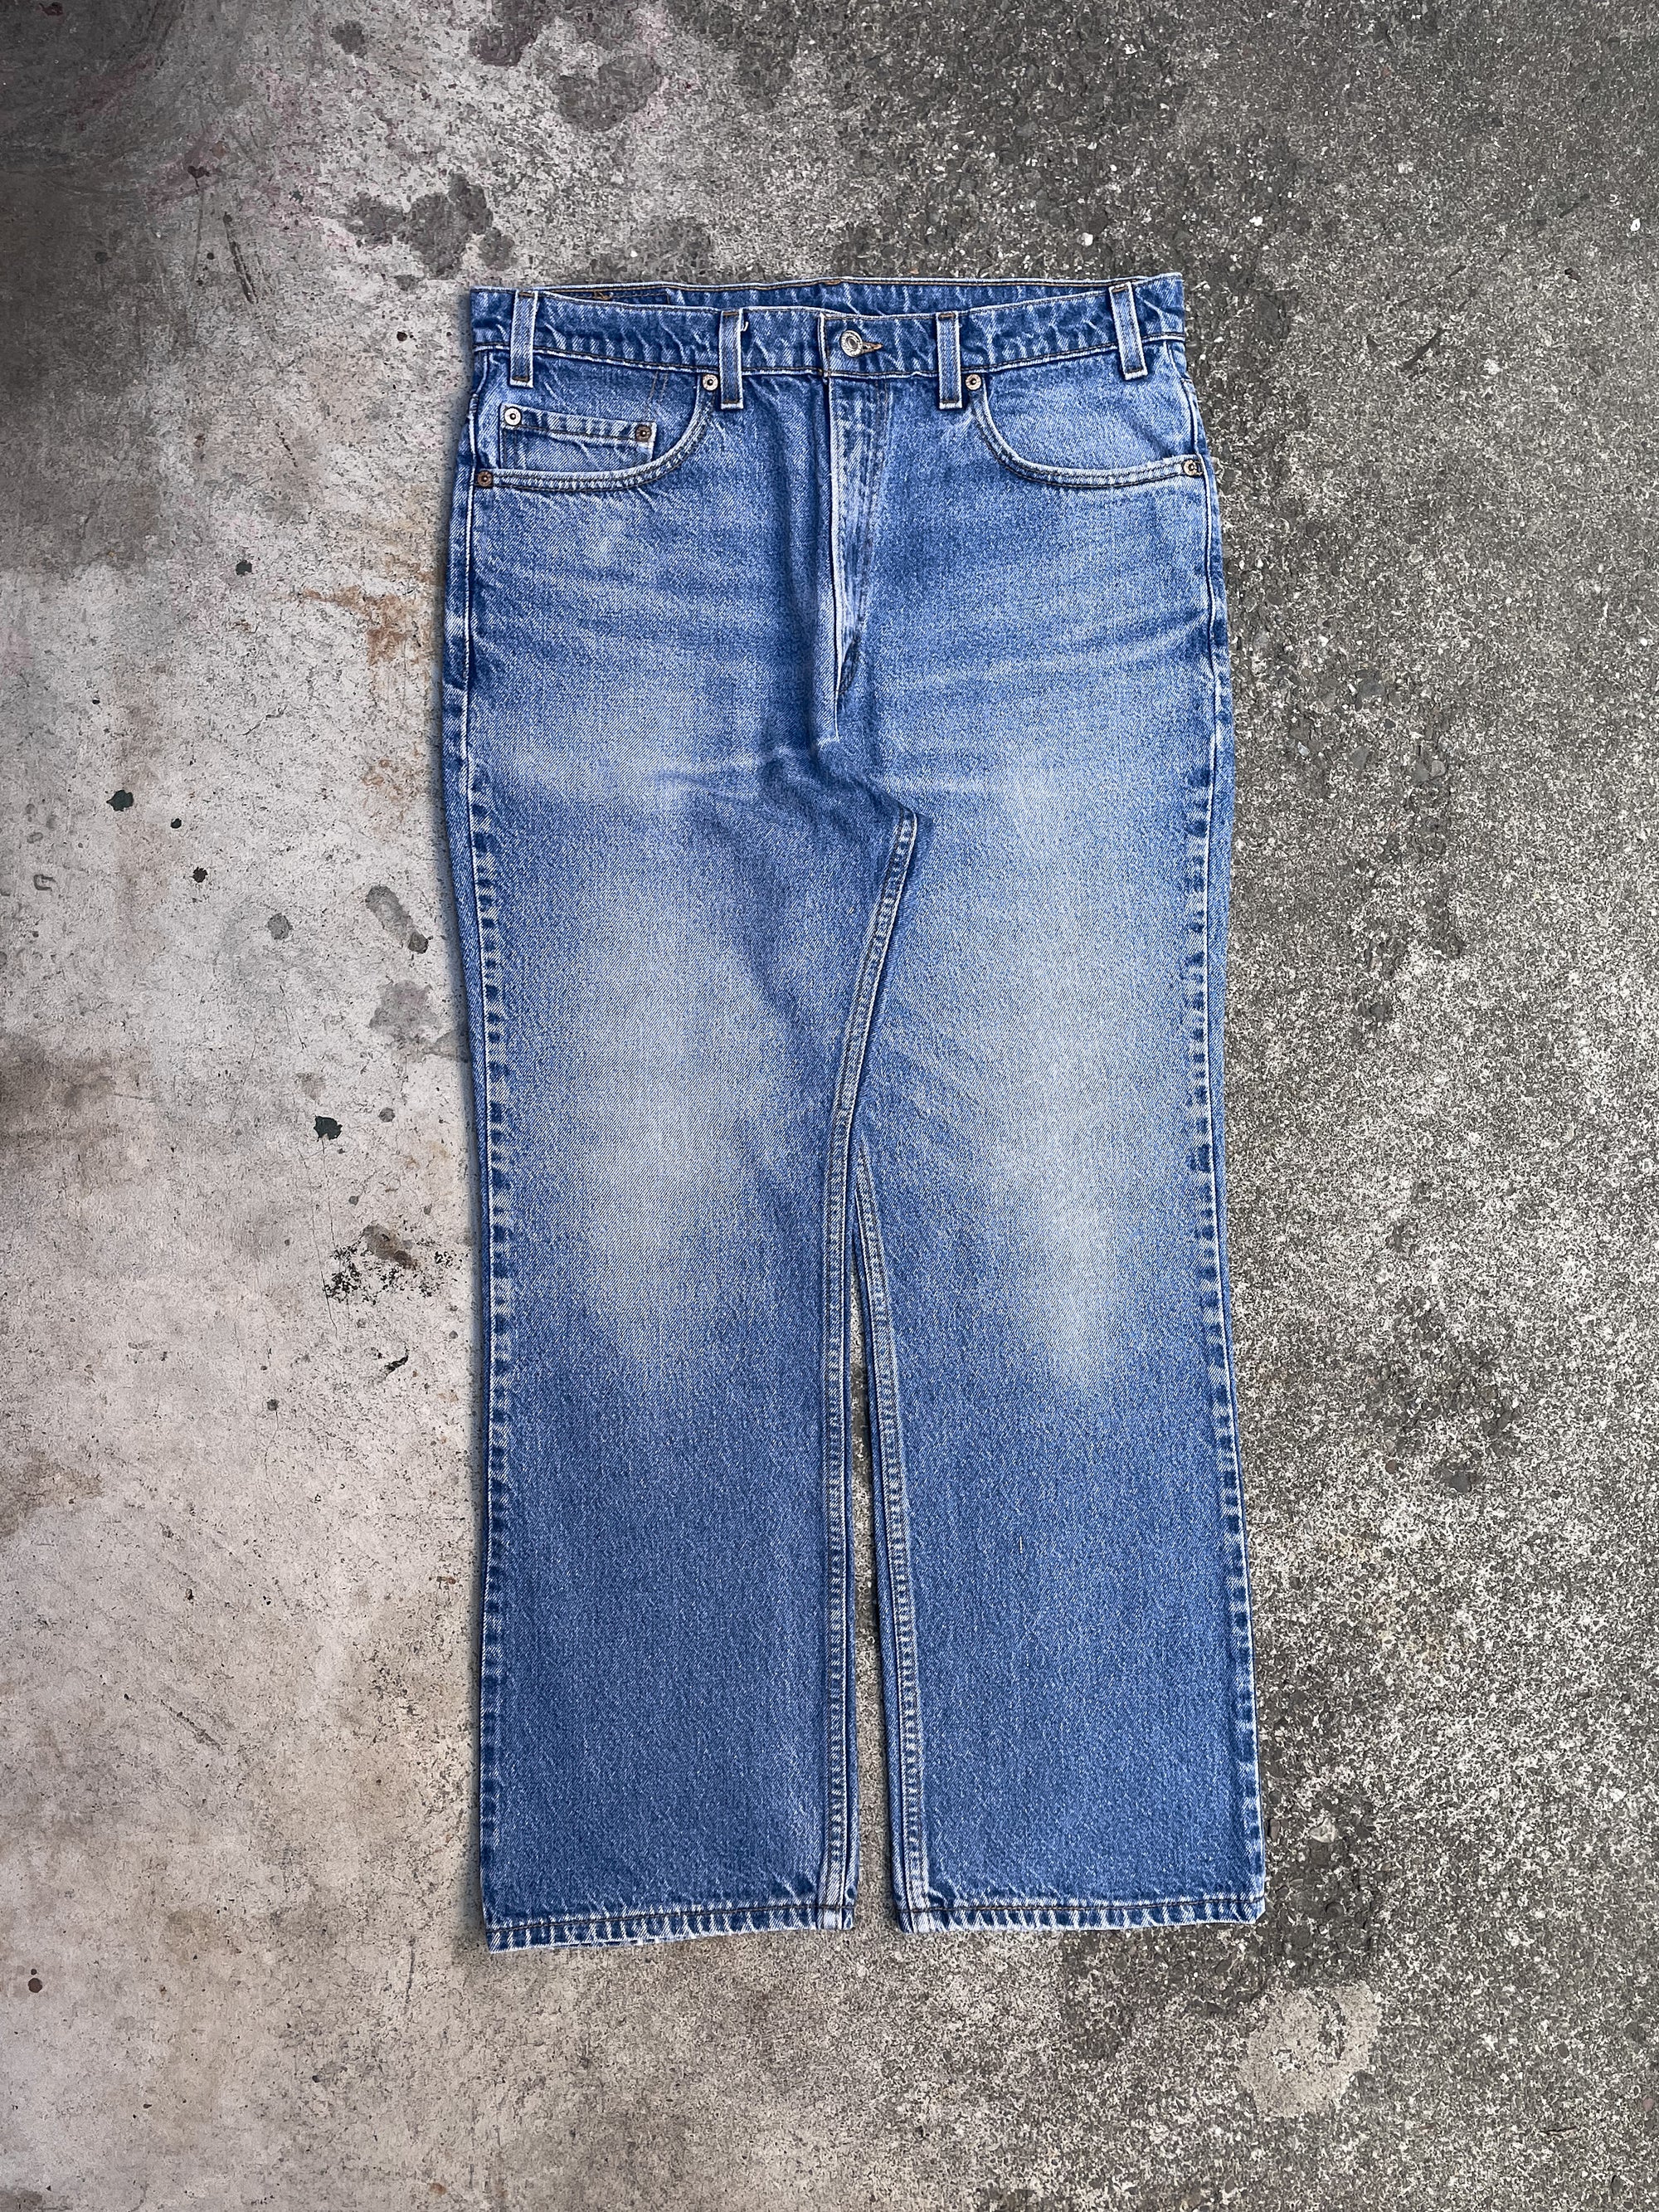 1990s Levis Faded Blue 517 (34X28)